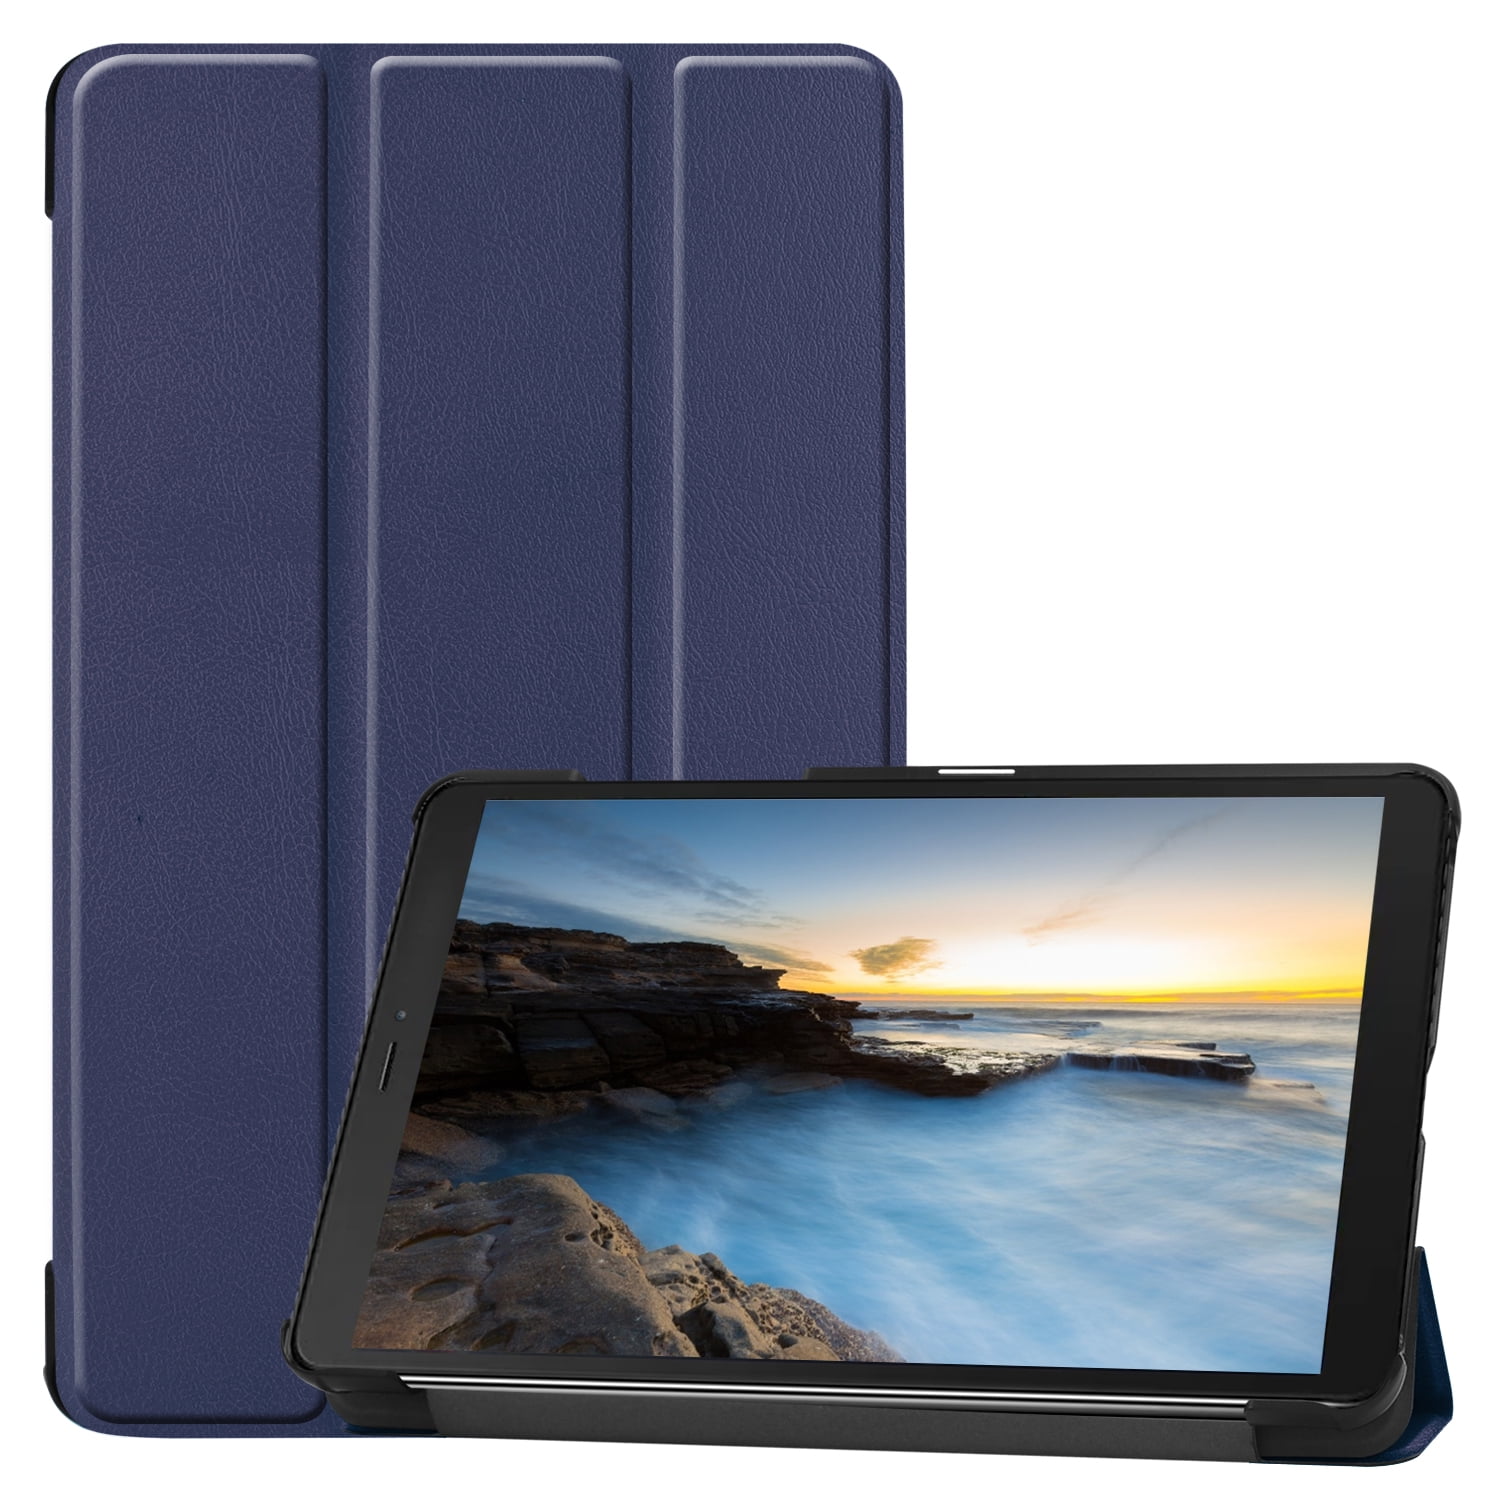 EpicGadget Case for Galaxy Tab A 8.0 Inch 2019 (SM-T290/SM-T295 